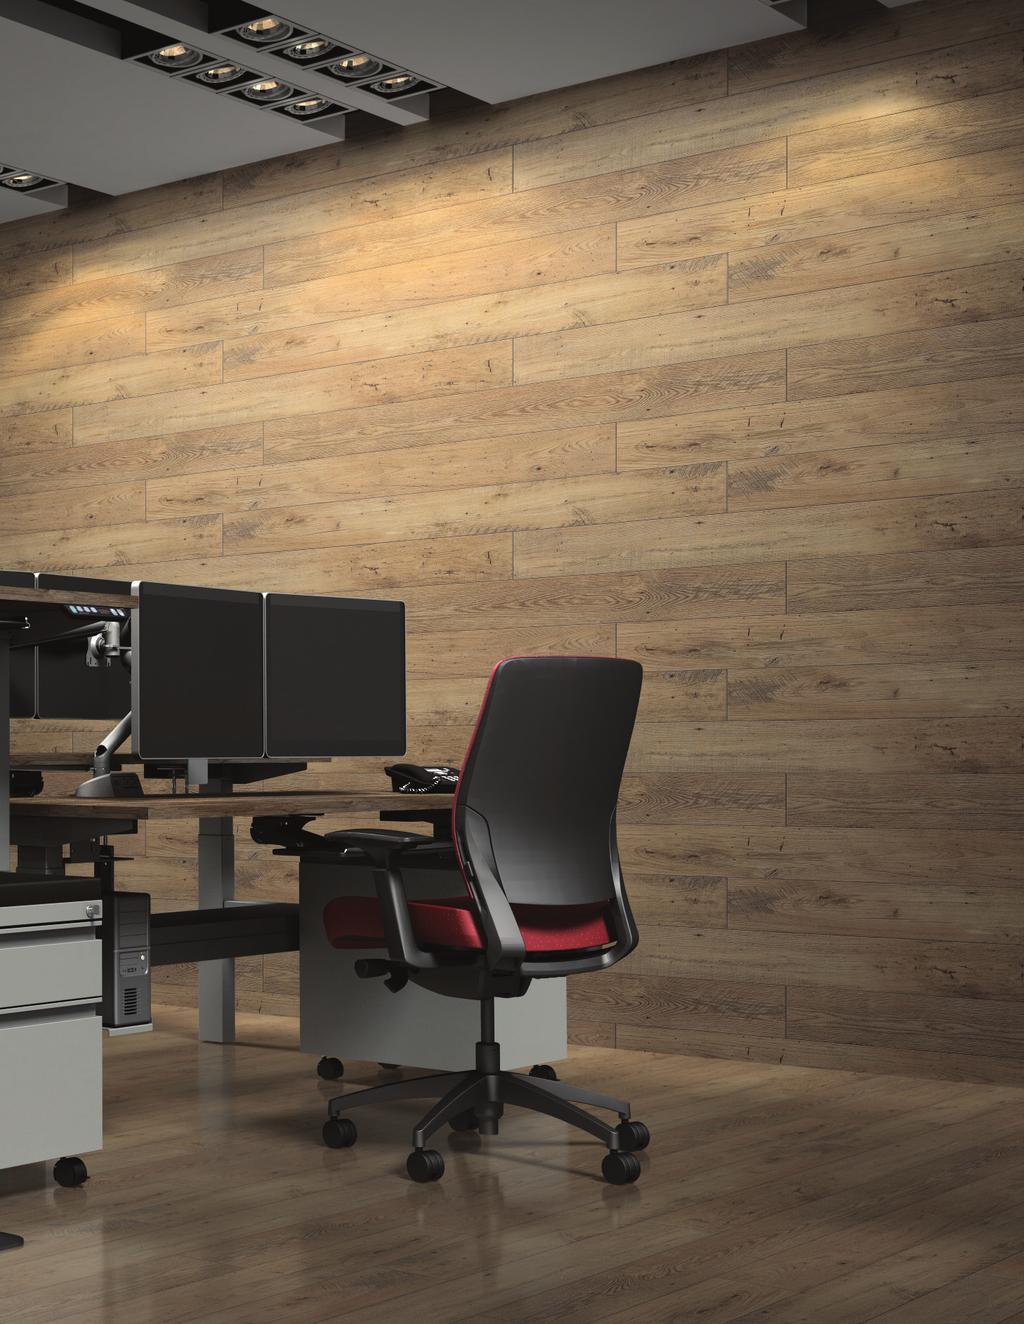 Introduction Symmetry Office has built its history on a foundation of offering well-designed products that bring together form and function and allow you to work comfortably, effectively and safely.